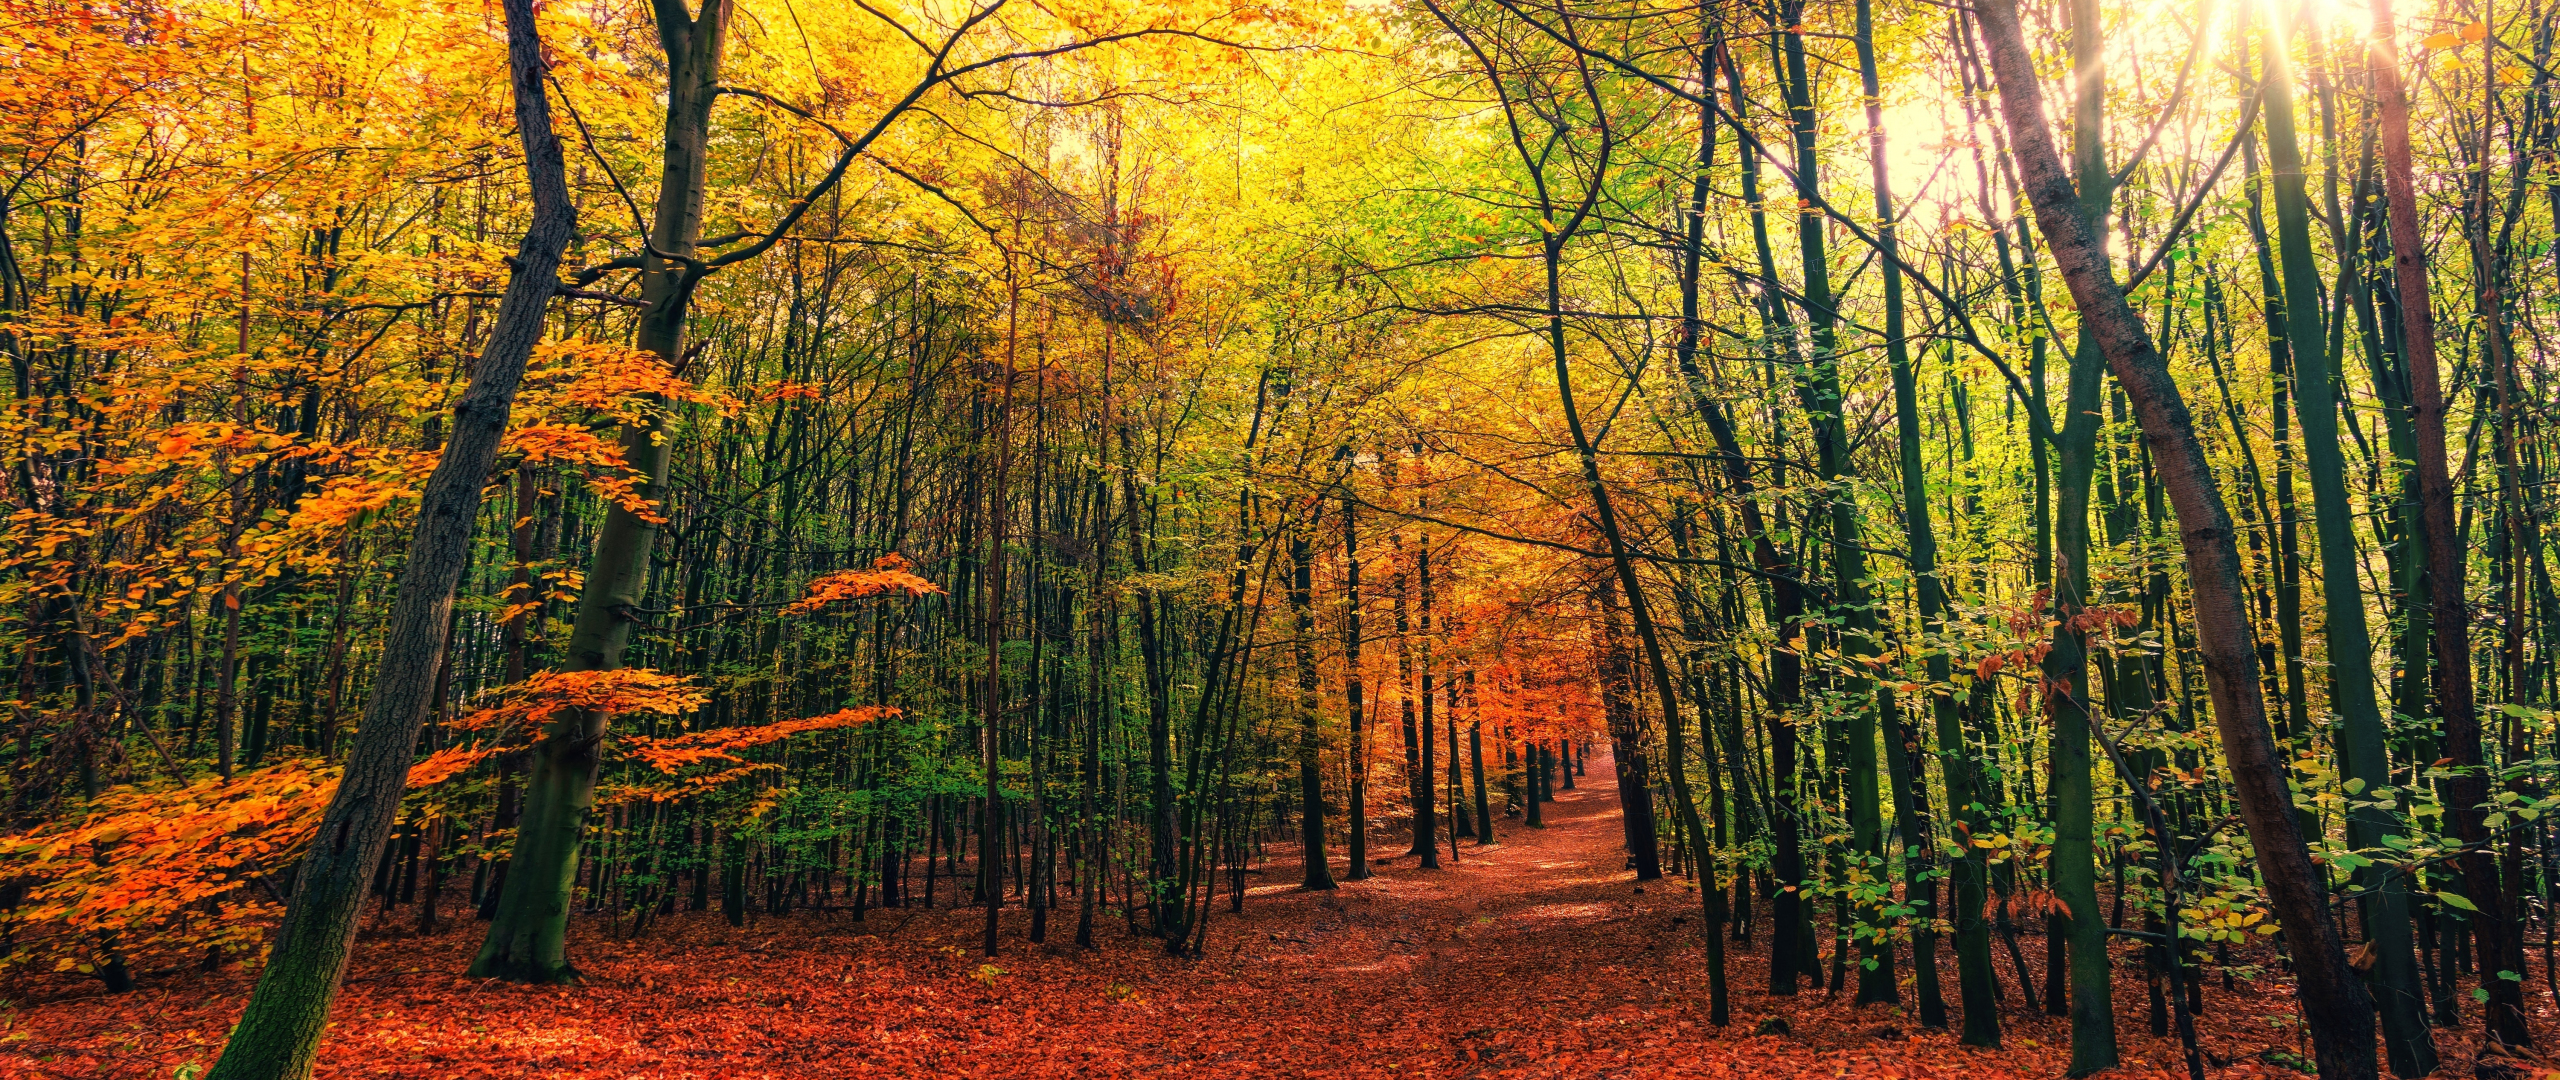 Download 2560x1080 wallpaper autumn, leaves, fall, tree, forest, nature ...